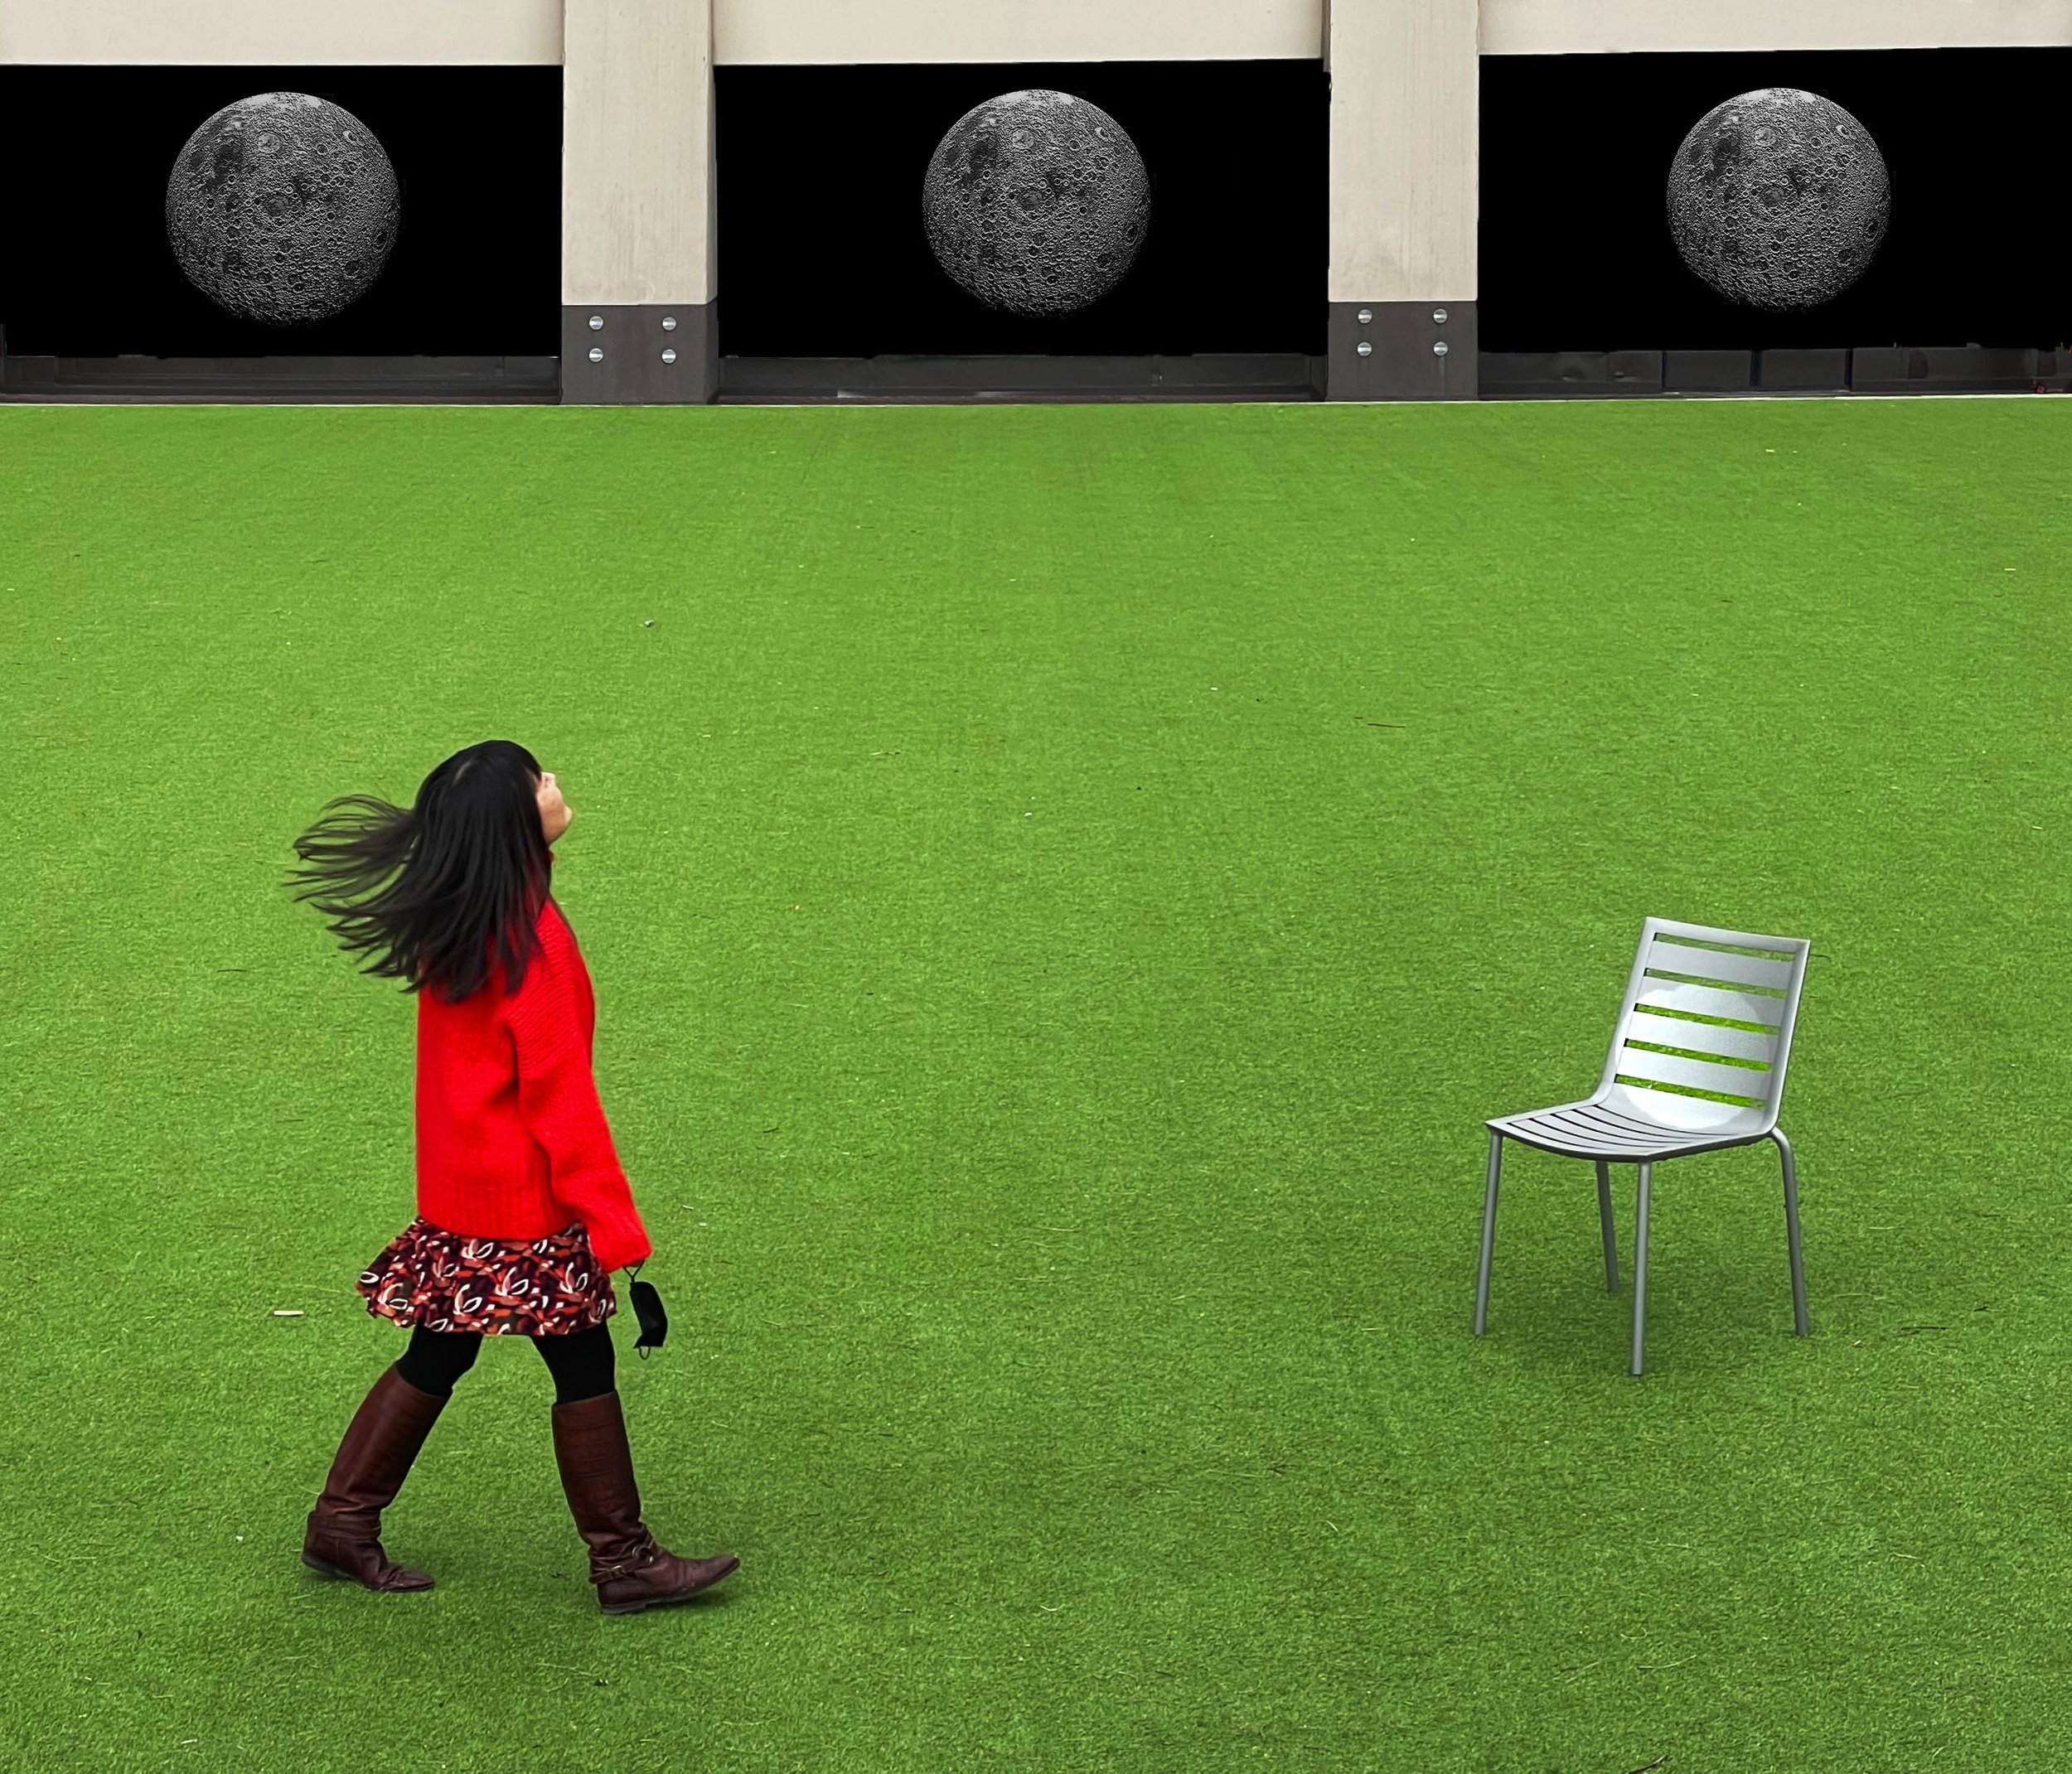 Alone on the Green Grass, She Contemplates Three Moons